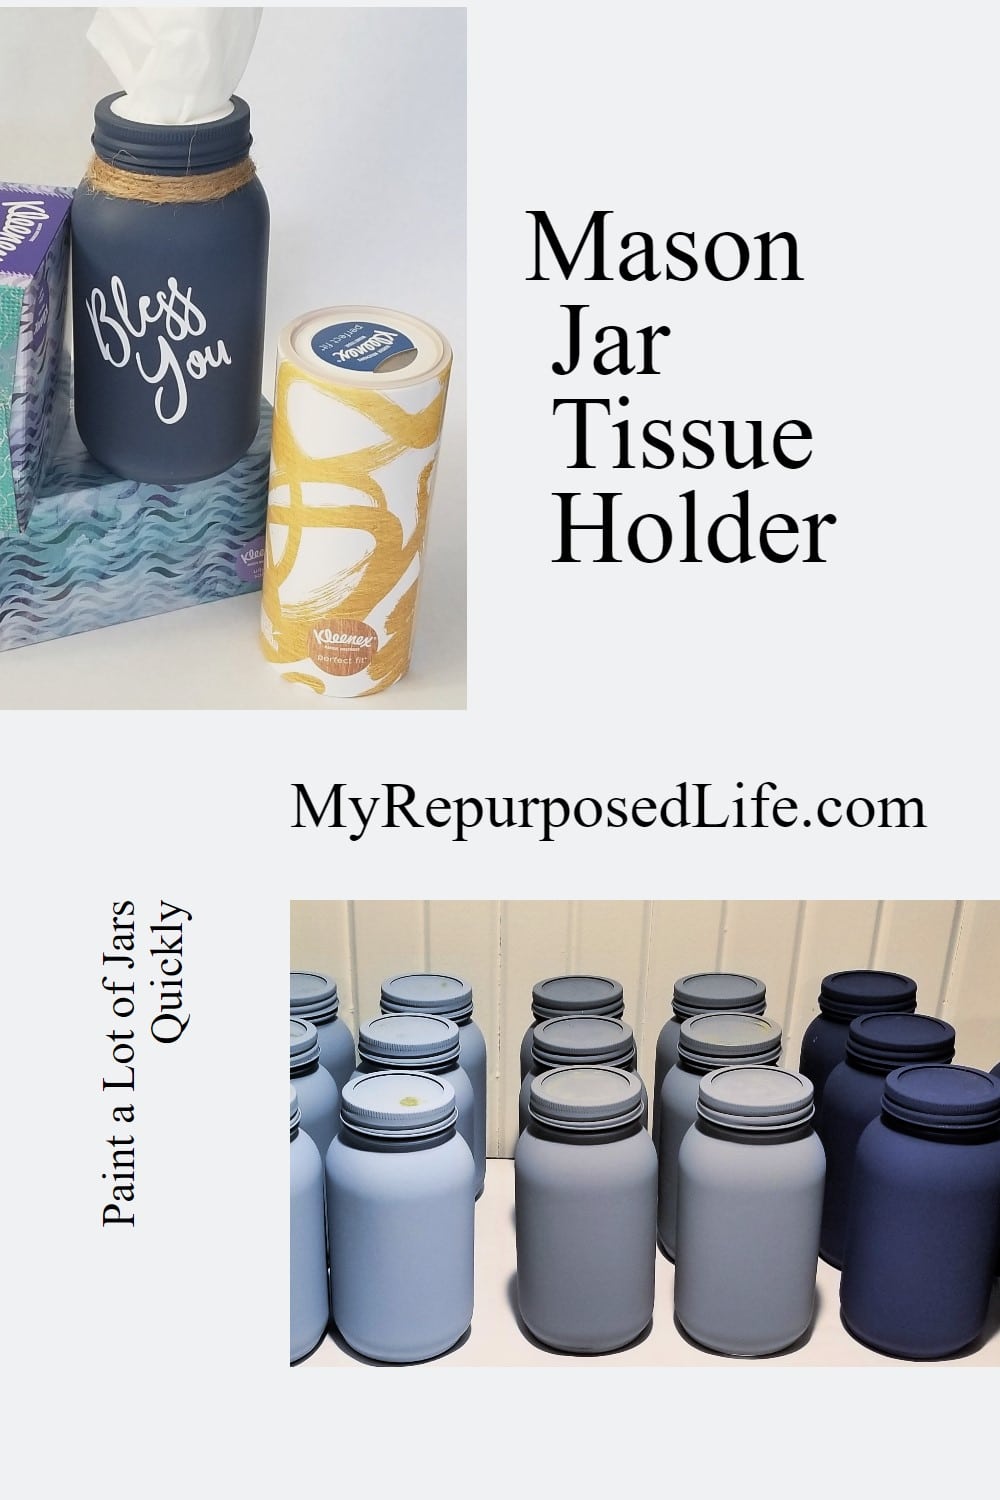 How to make a couple dozen mason jar tissue holders quickly and easily for your neighbors or favorite teachers. What size tissues do you use? I have all the answers. #MyRepurposedLife #diy #masonjars via @repurposedlife